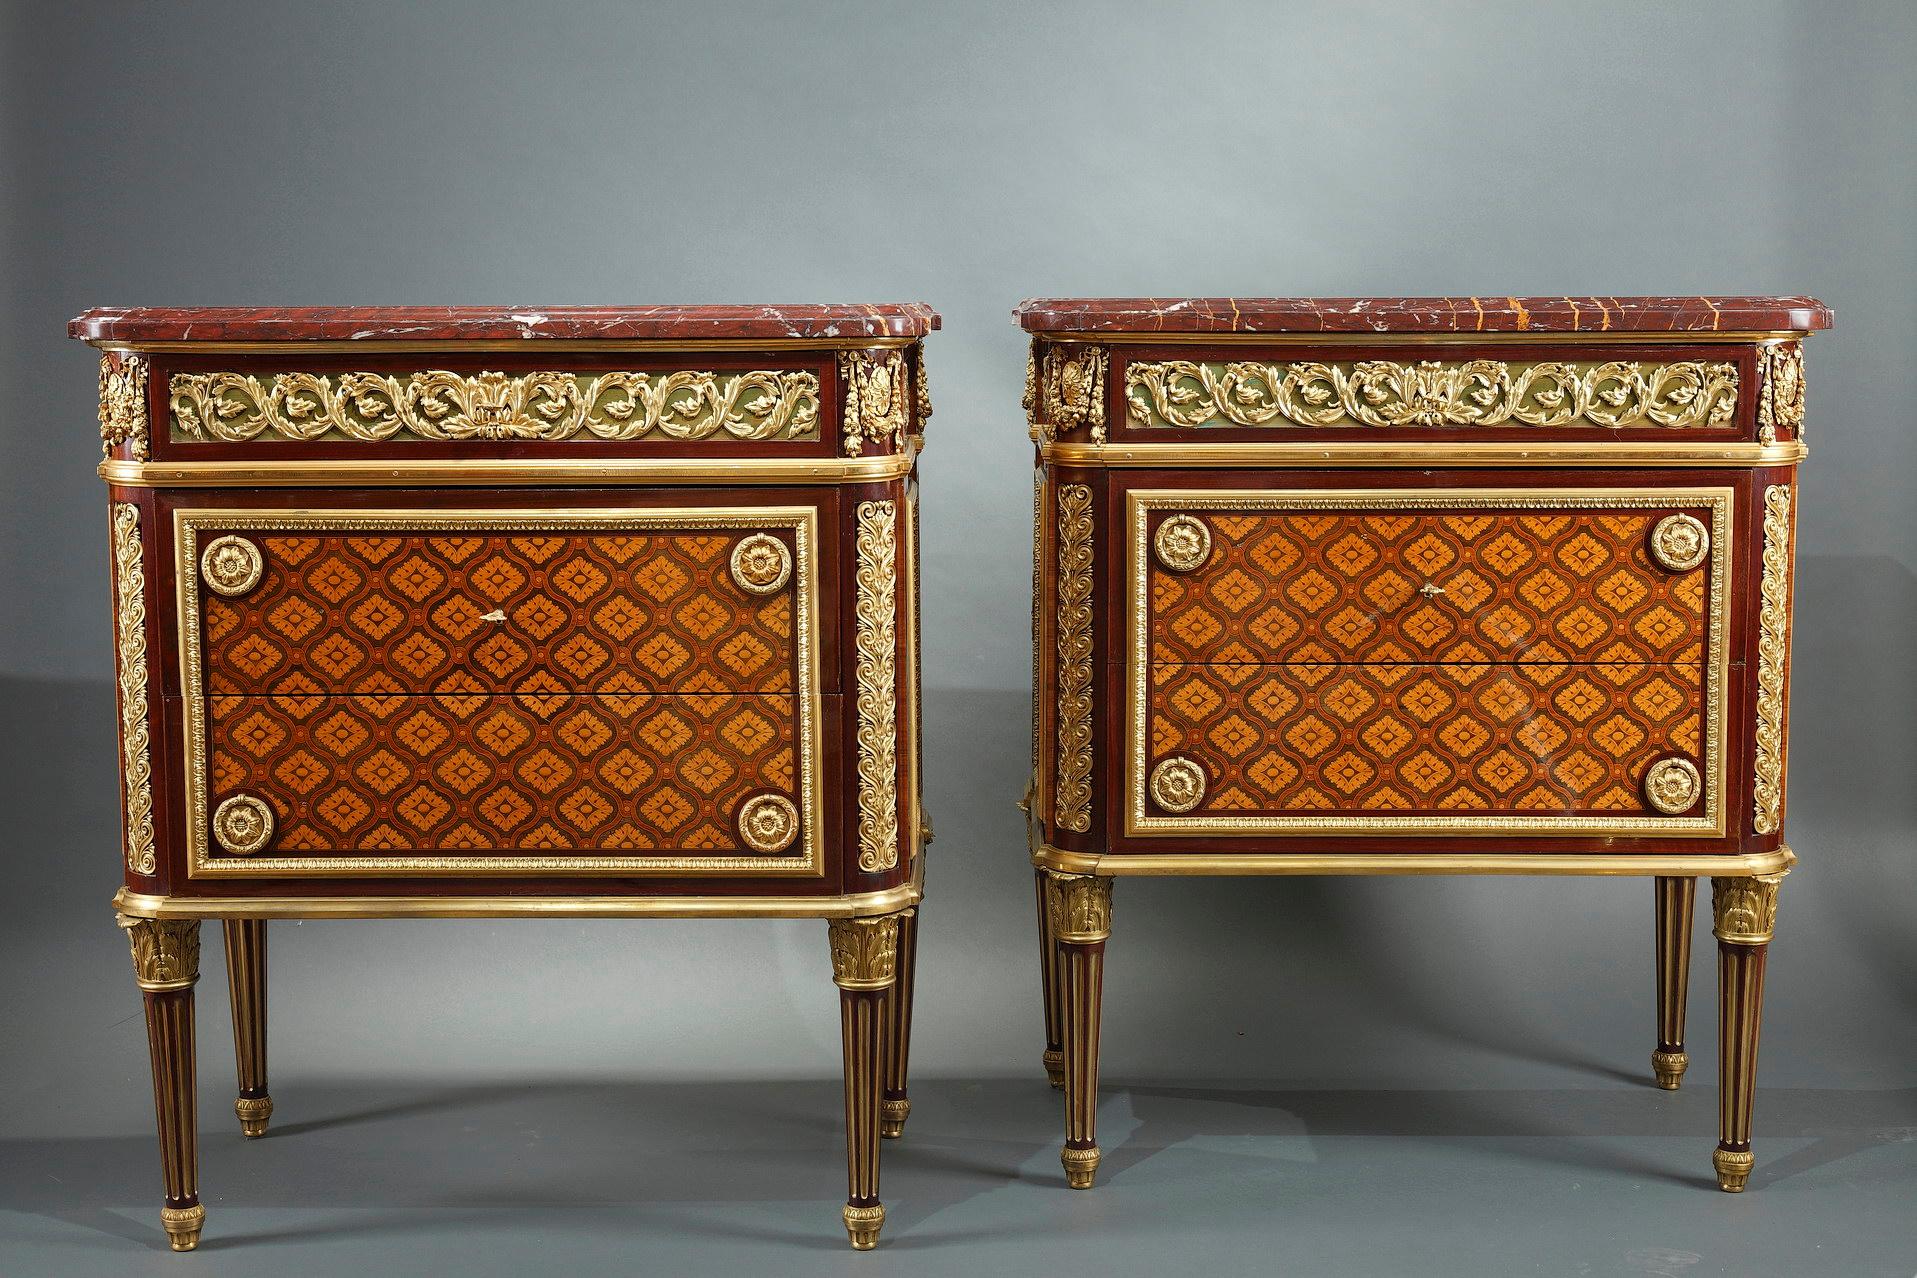 Pair of Louis XVI style commodes attributed to Krieger, in veneered wood and gilded bronze ; opening with three drawers, including one on the belt forming a writing desk and concealing two small side drawers. The commodes are decorated with an